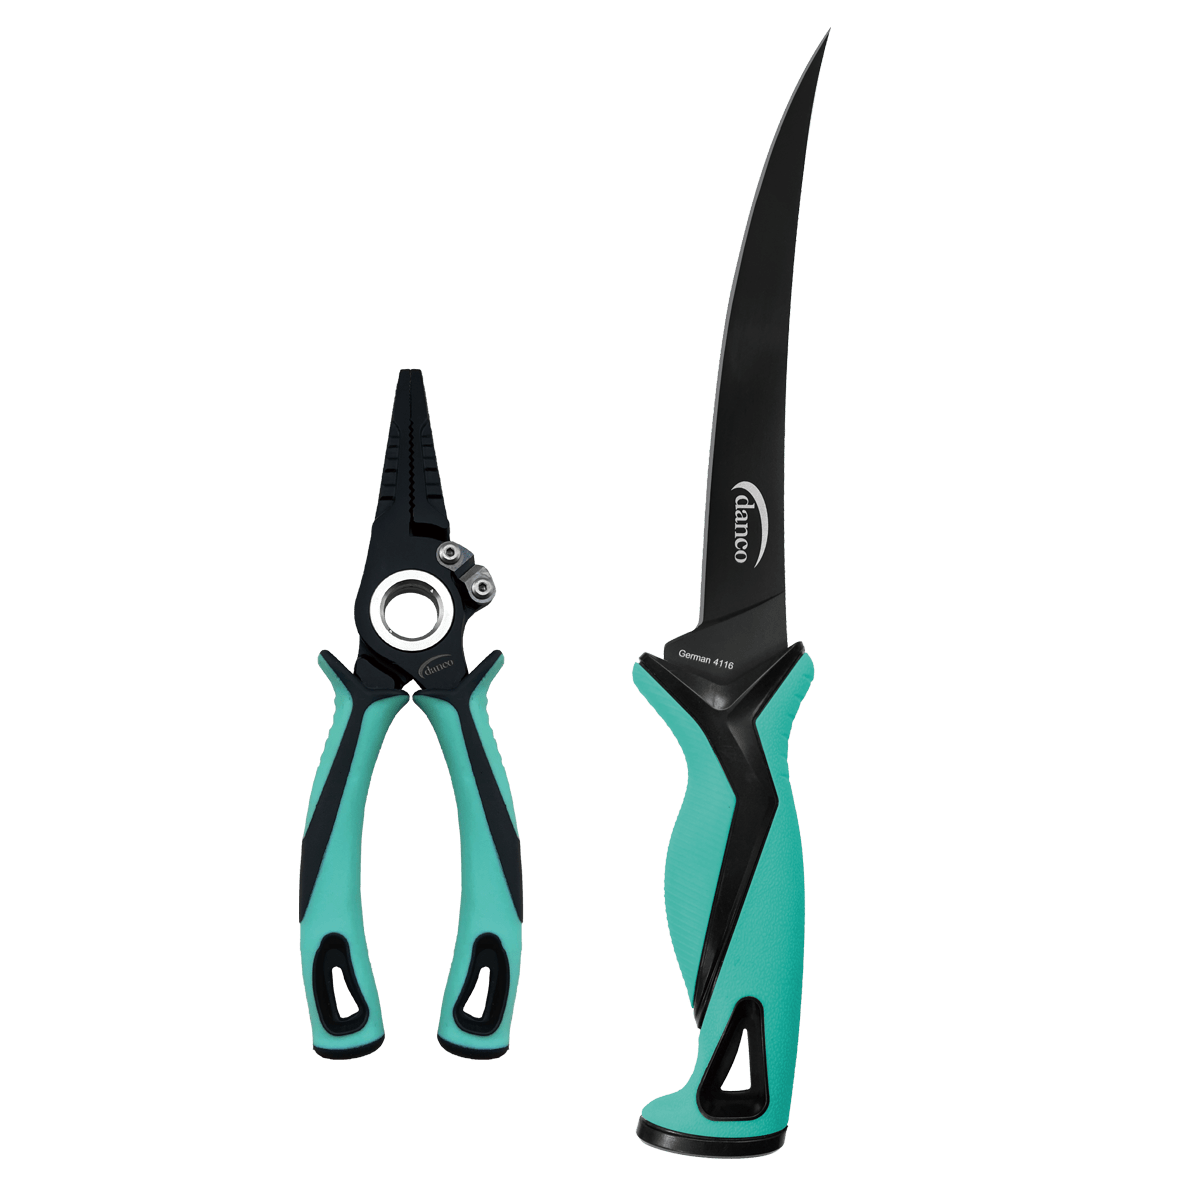 Tsunami Split Ring Pliers Saltwater Braid Cutters - Canal Bait and